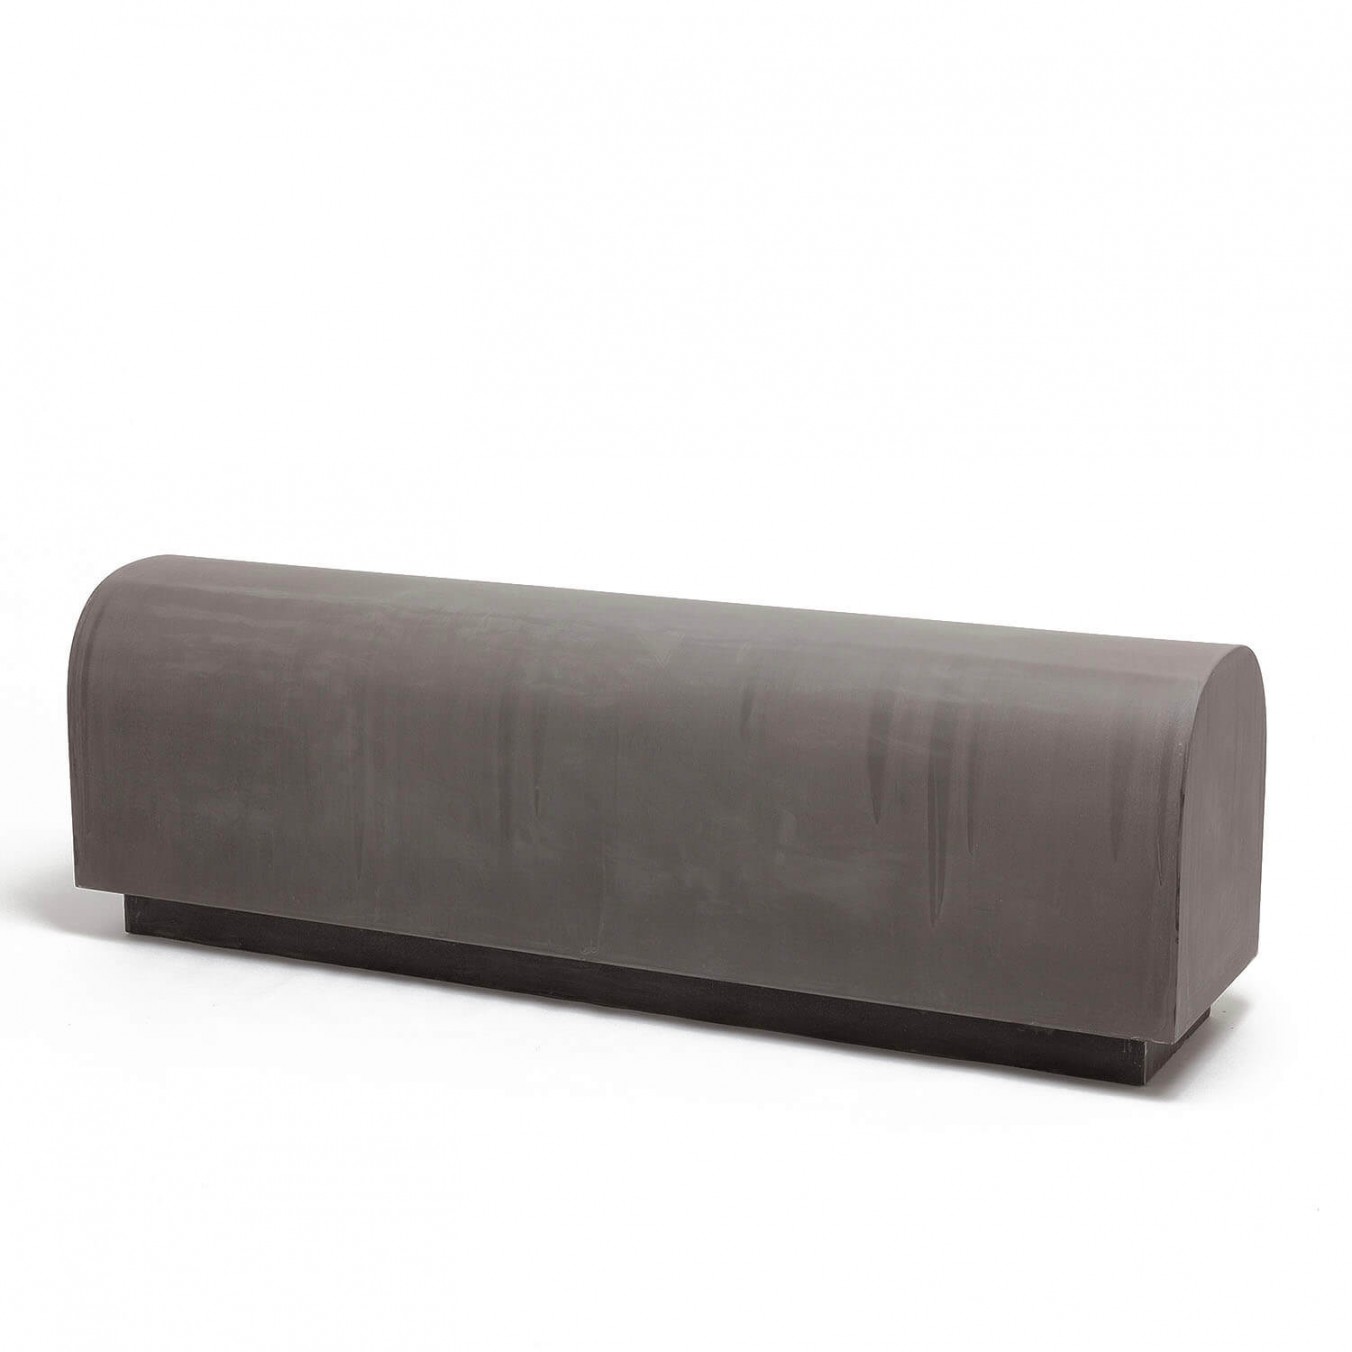 Roly-Poly CHUBBY BENCH / PLASTER